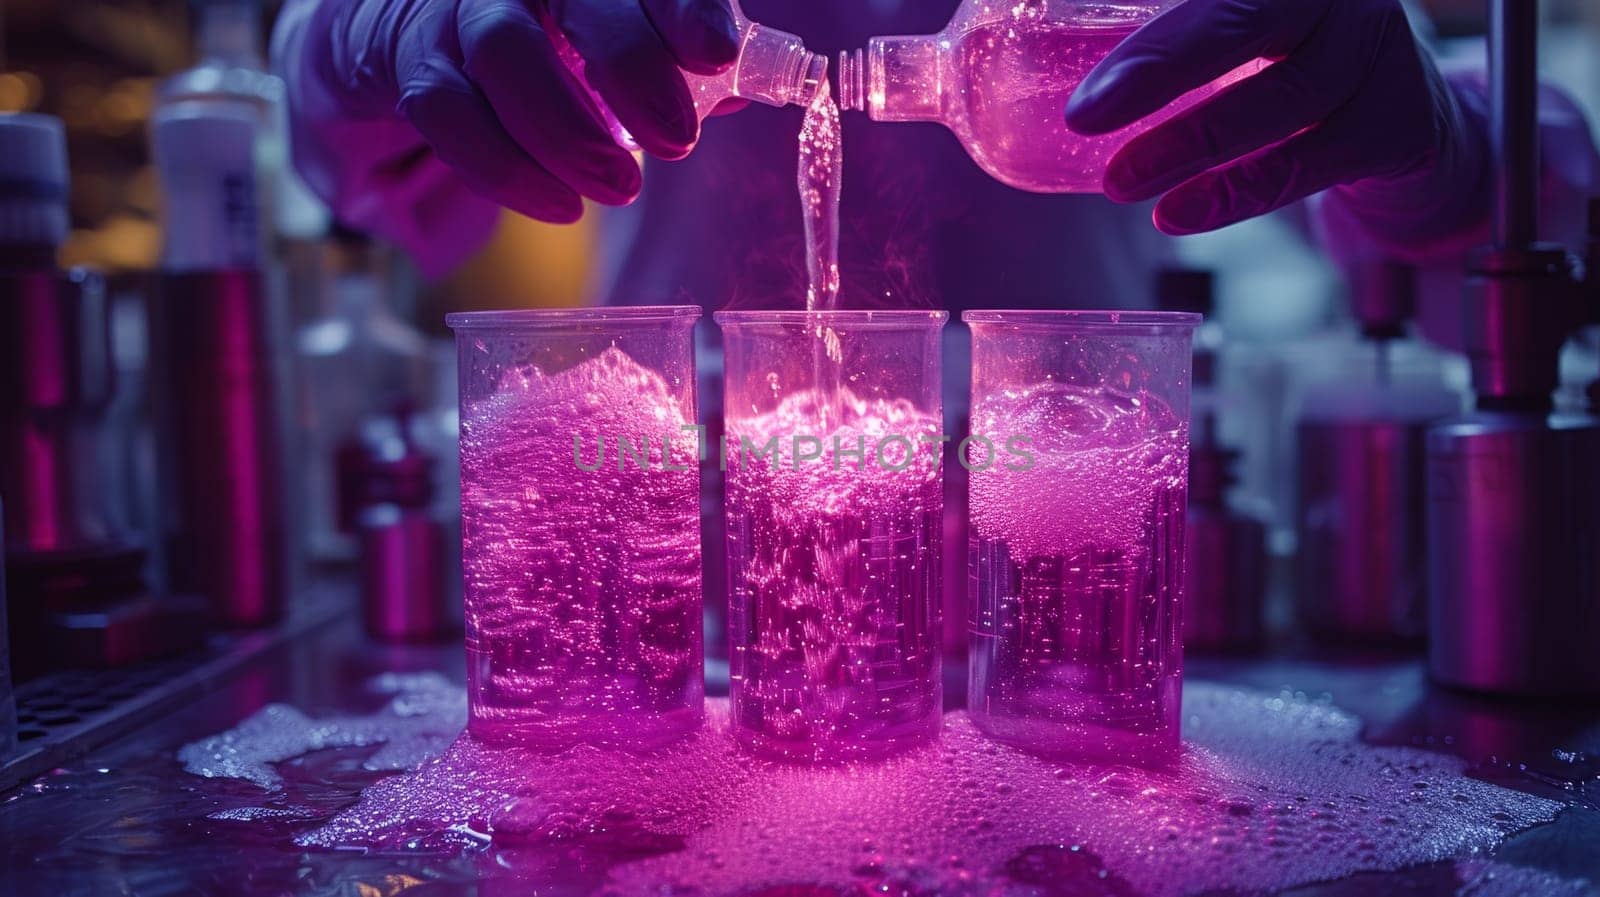 During a science experiment, a biotech scientist pours purple liquid by Andrei_01